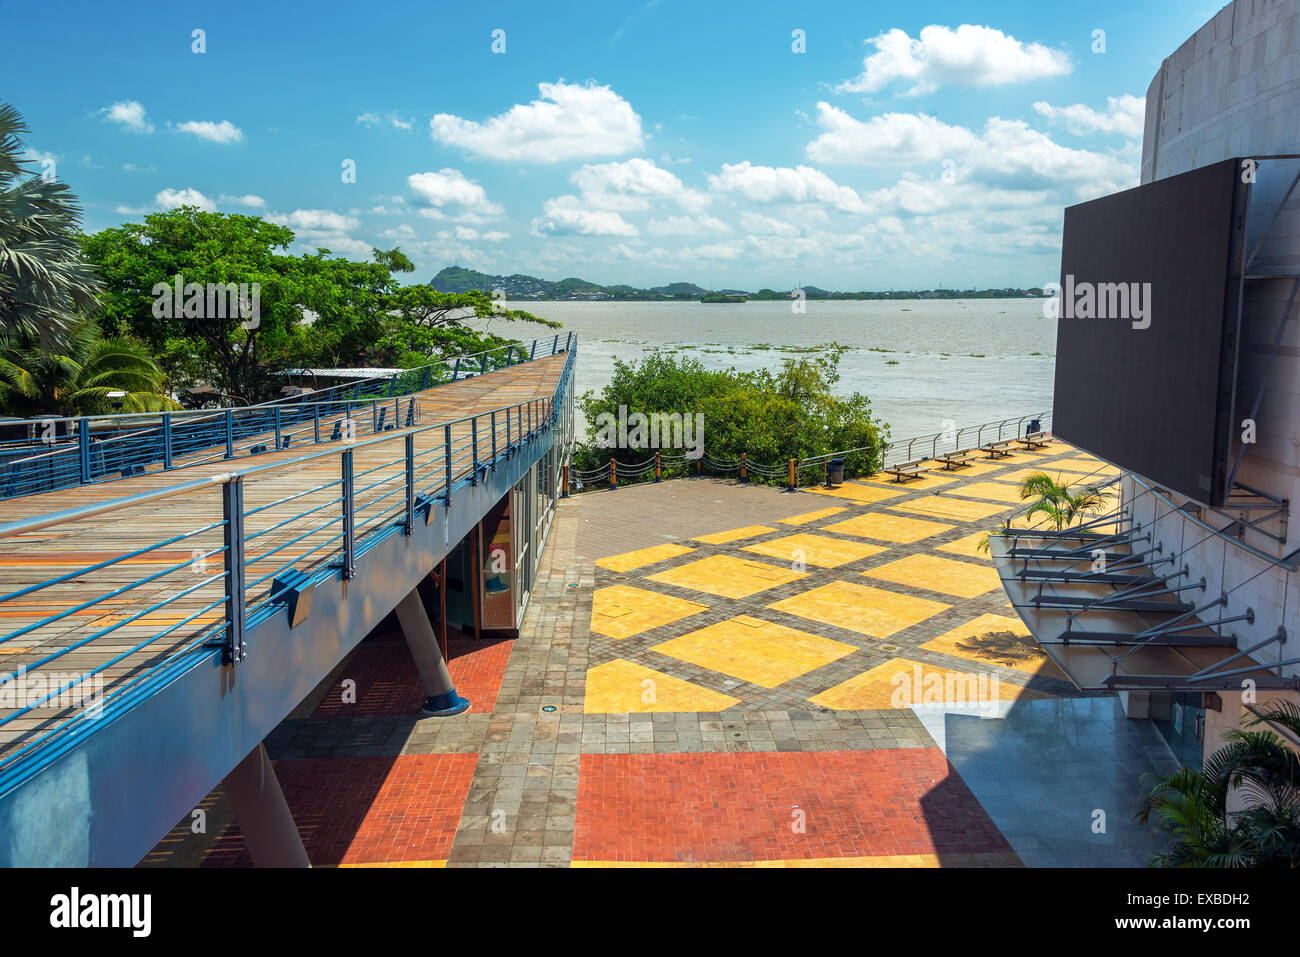 View of part of the boardwalk in Guayaquil, Ecuador Stock Photo